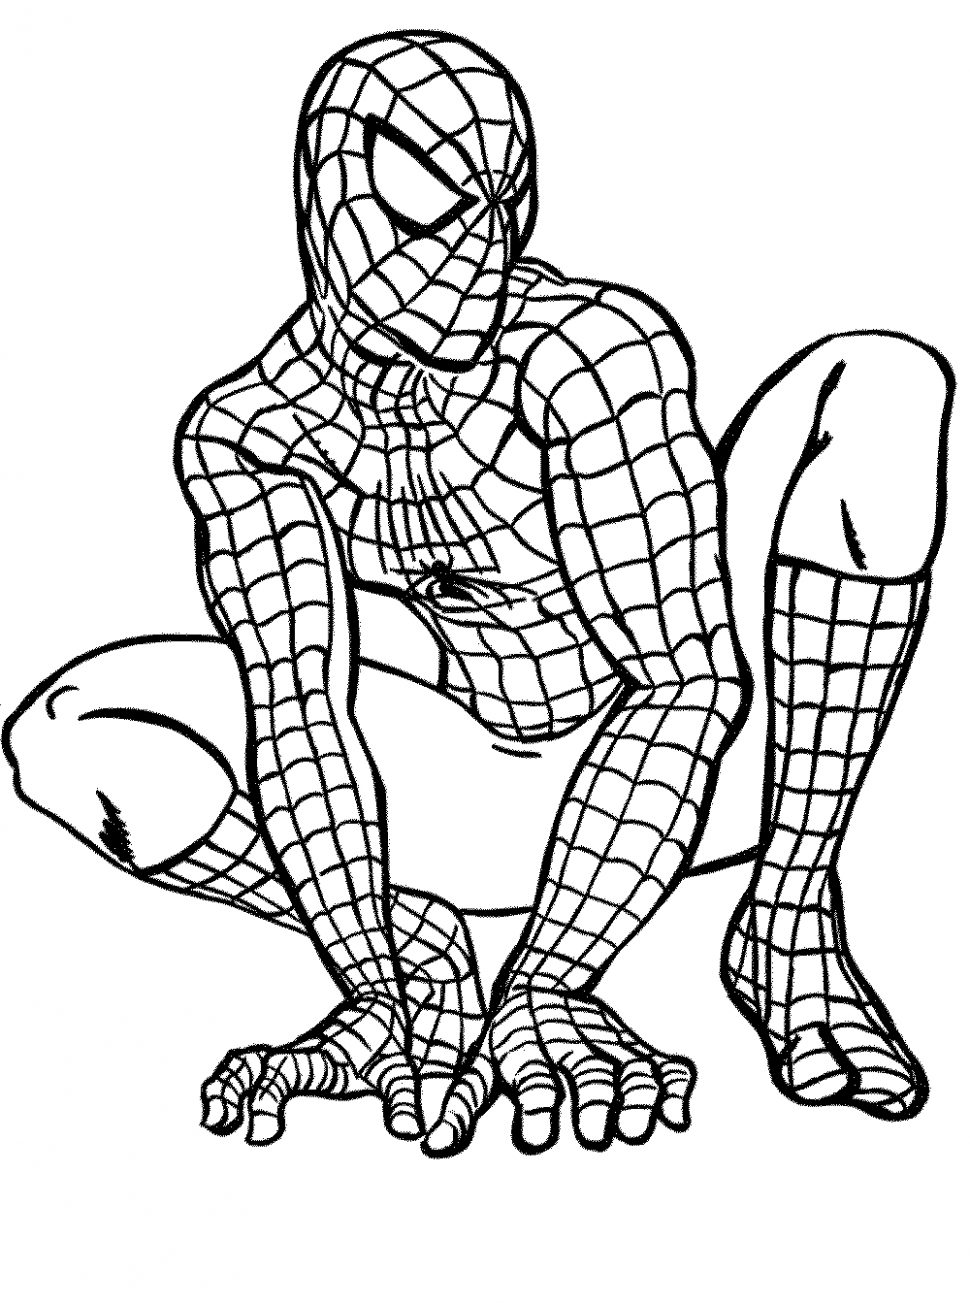 Spiderman coloring page 2